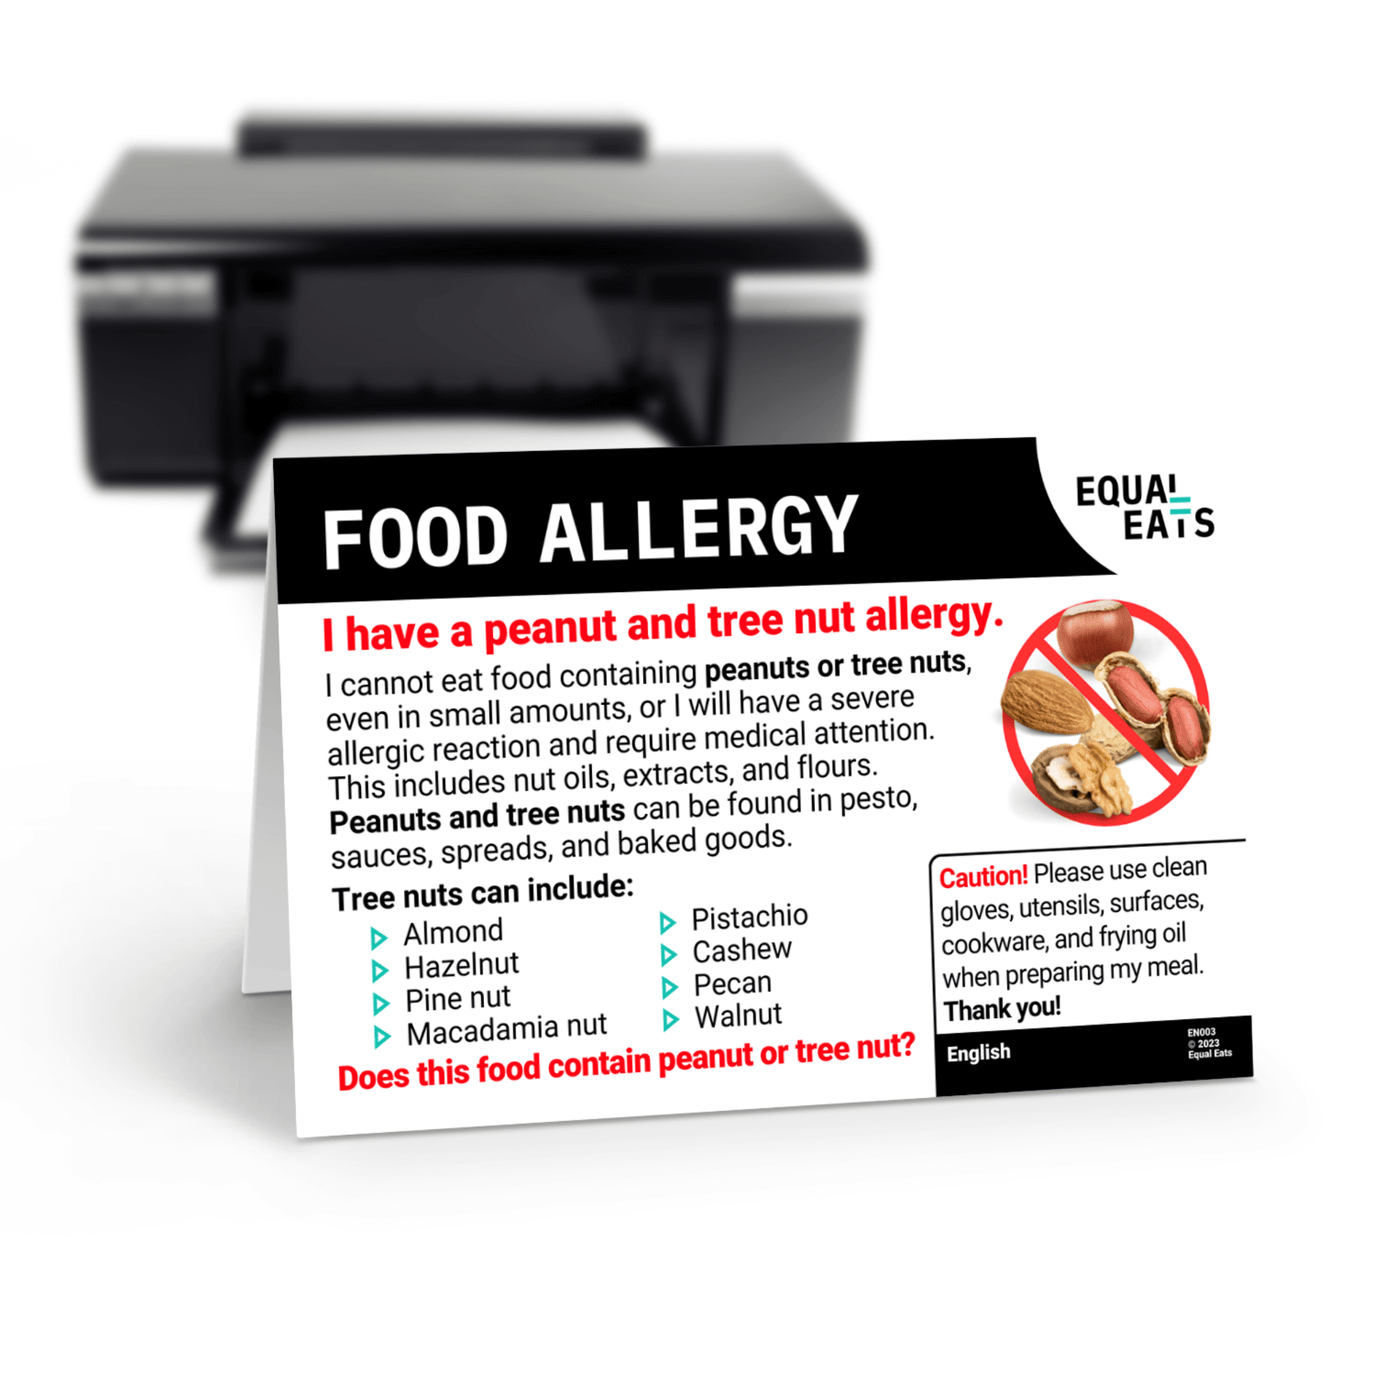 Swedish Printable Allergy Card for Tree Nut Allergies